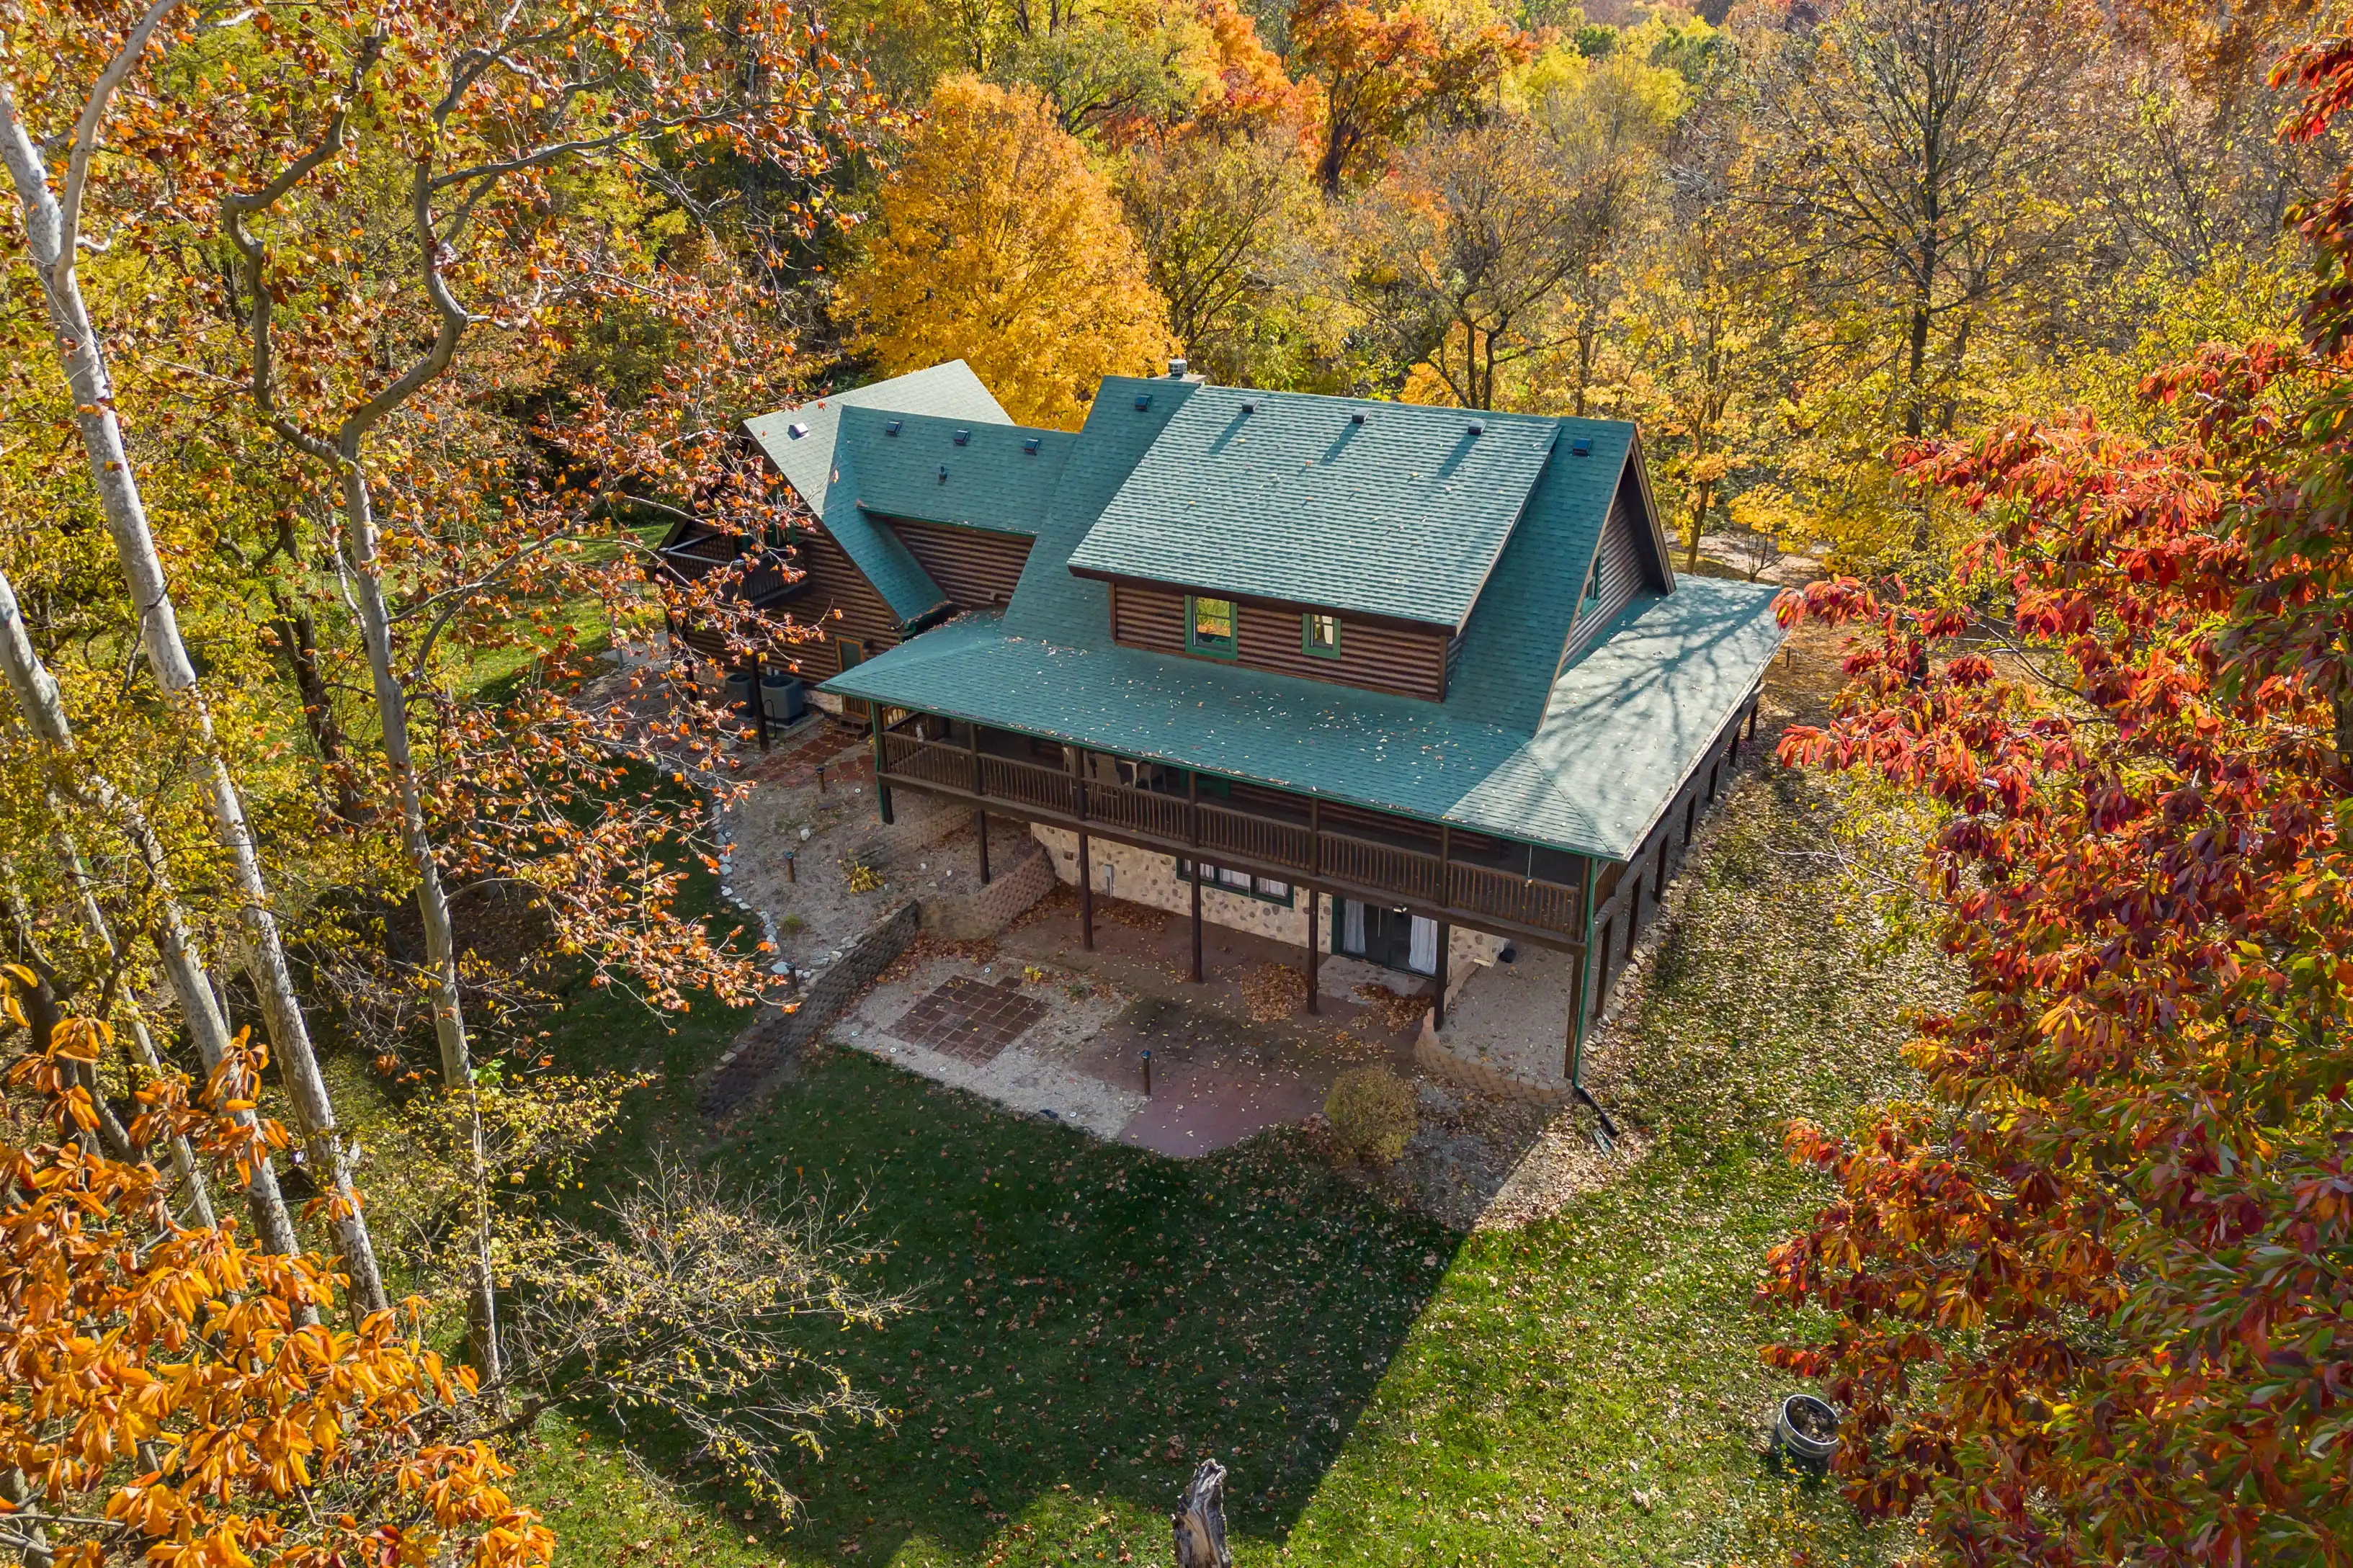 Aerial view of a large cabin with a green roof surrounded by trees with autumn foliage.